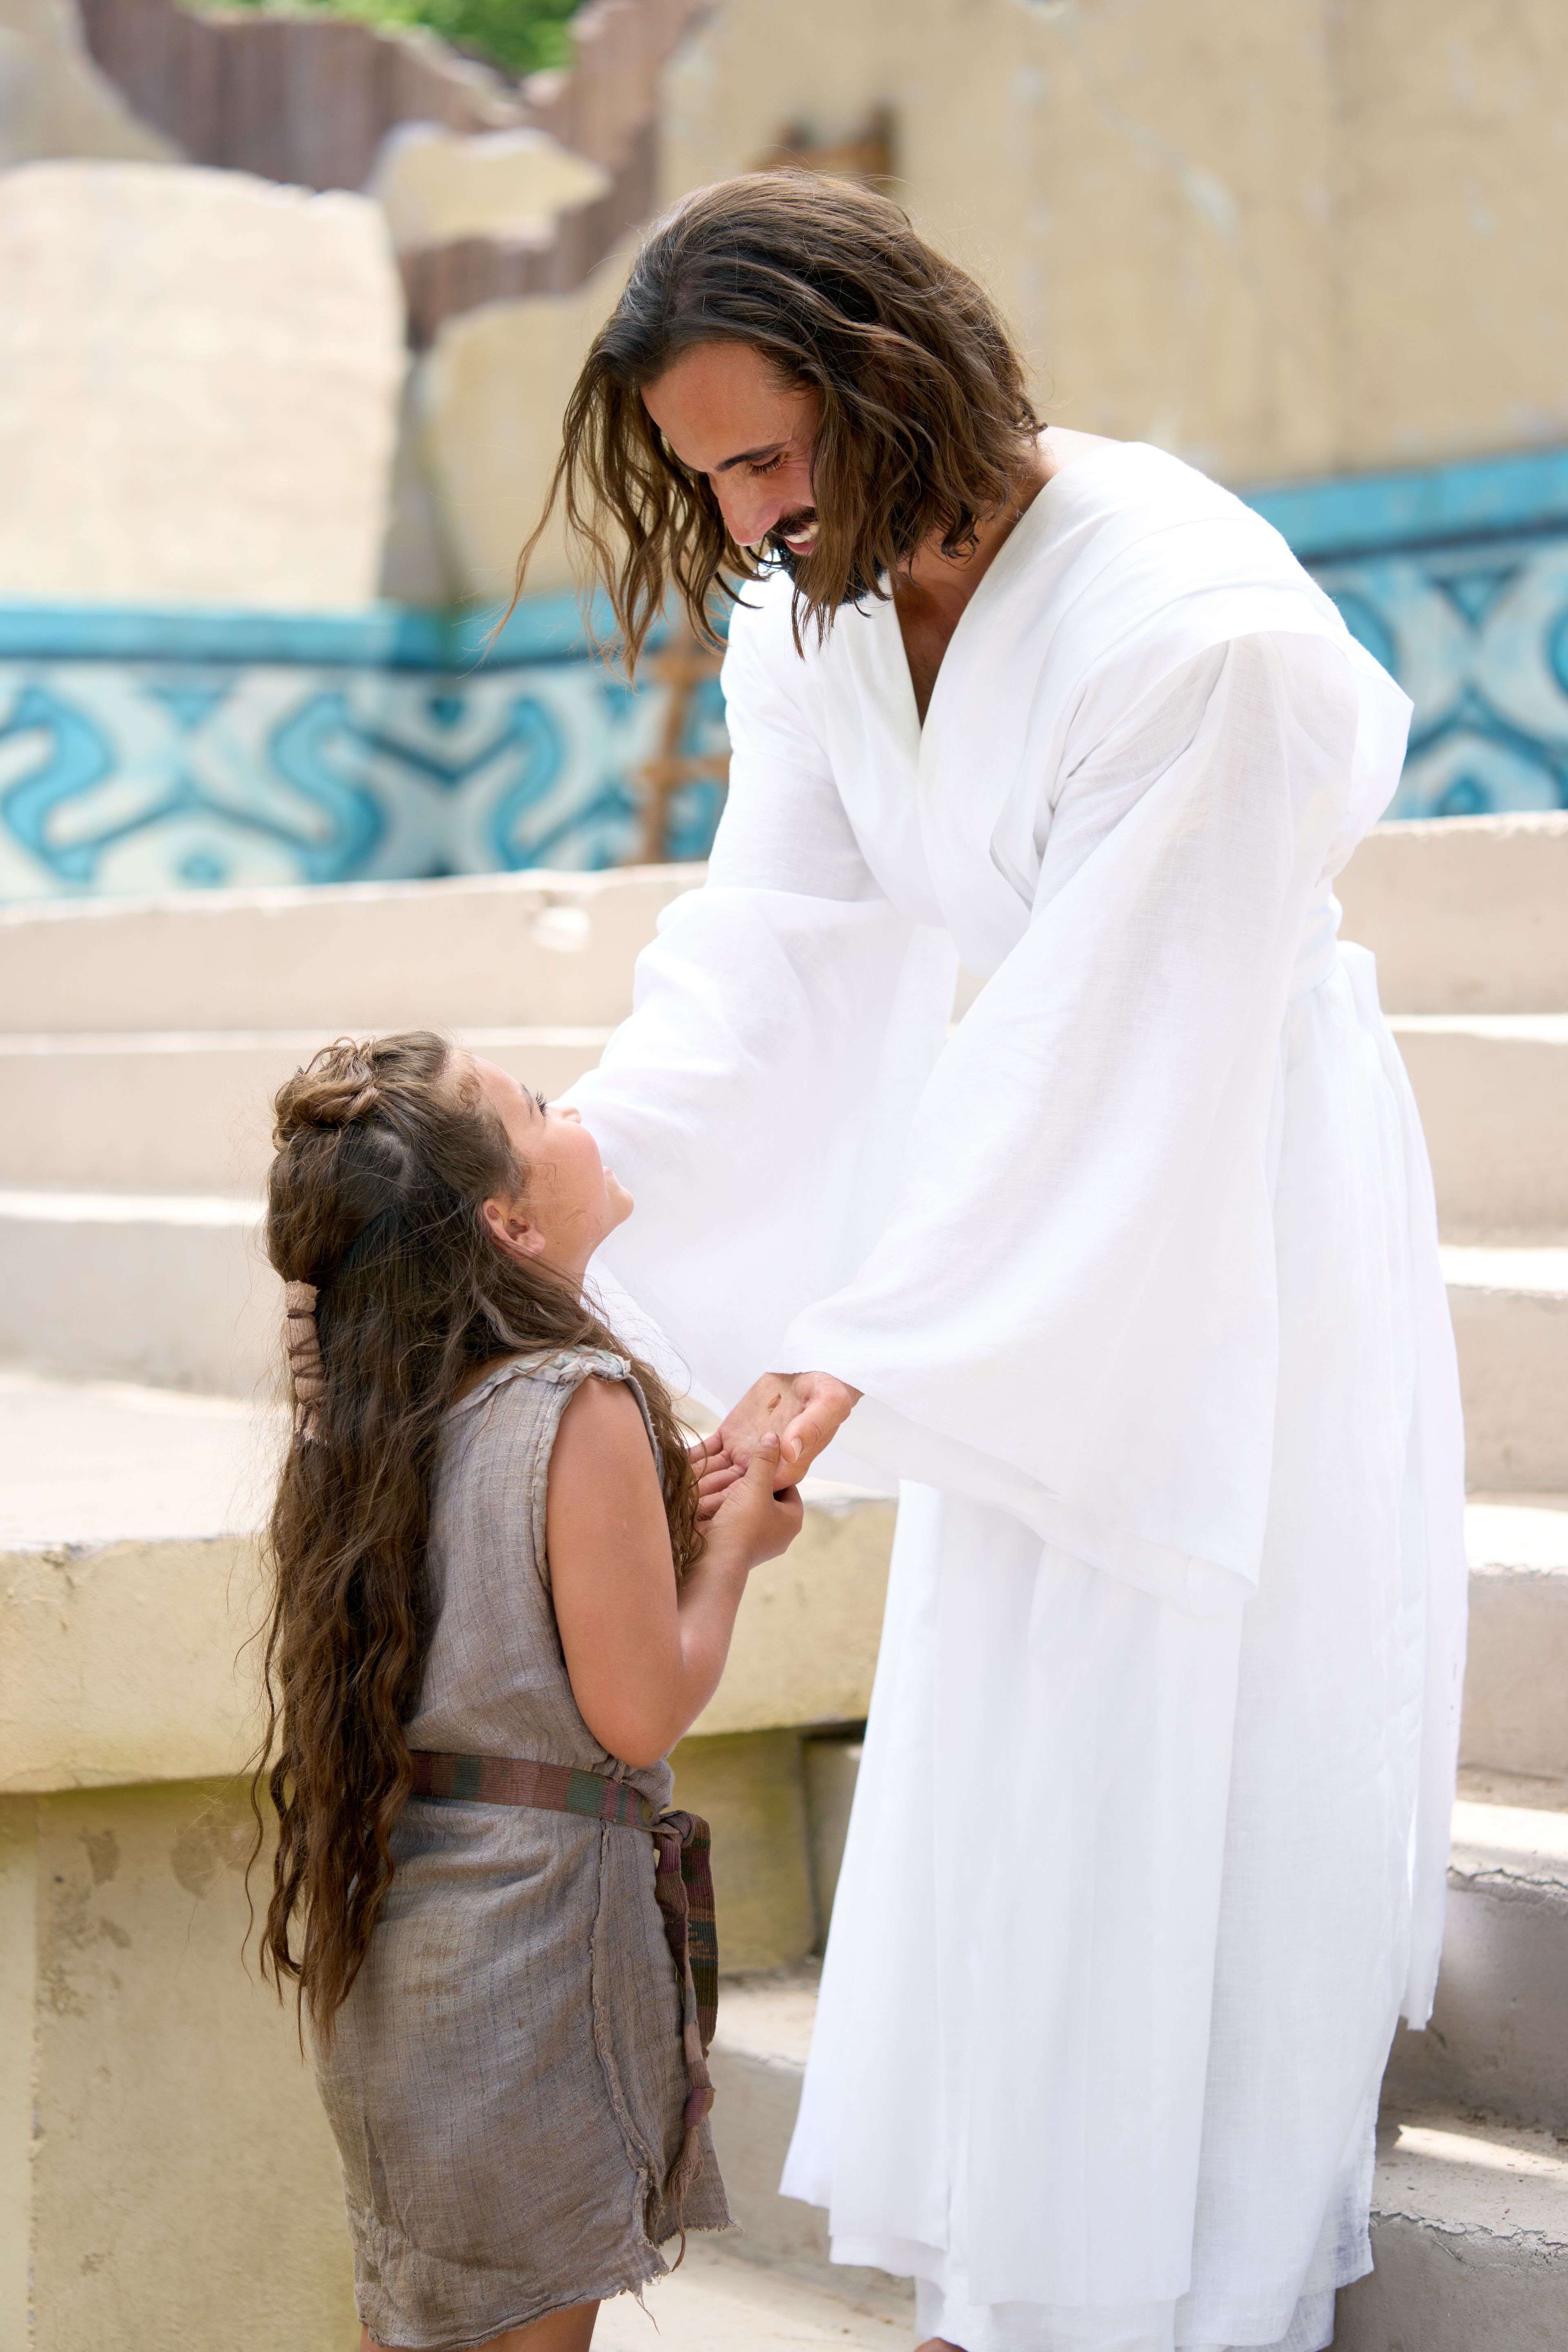 The resurrected Savior, Jesus Christ smiles as he ministers to a young girl during his visit with the ancient inhabitants of America.